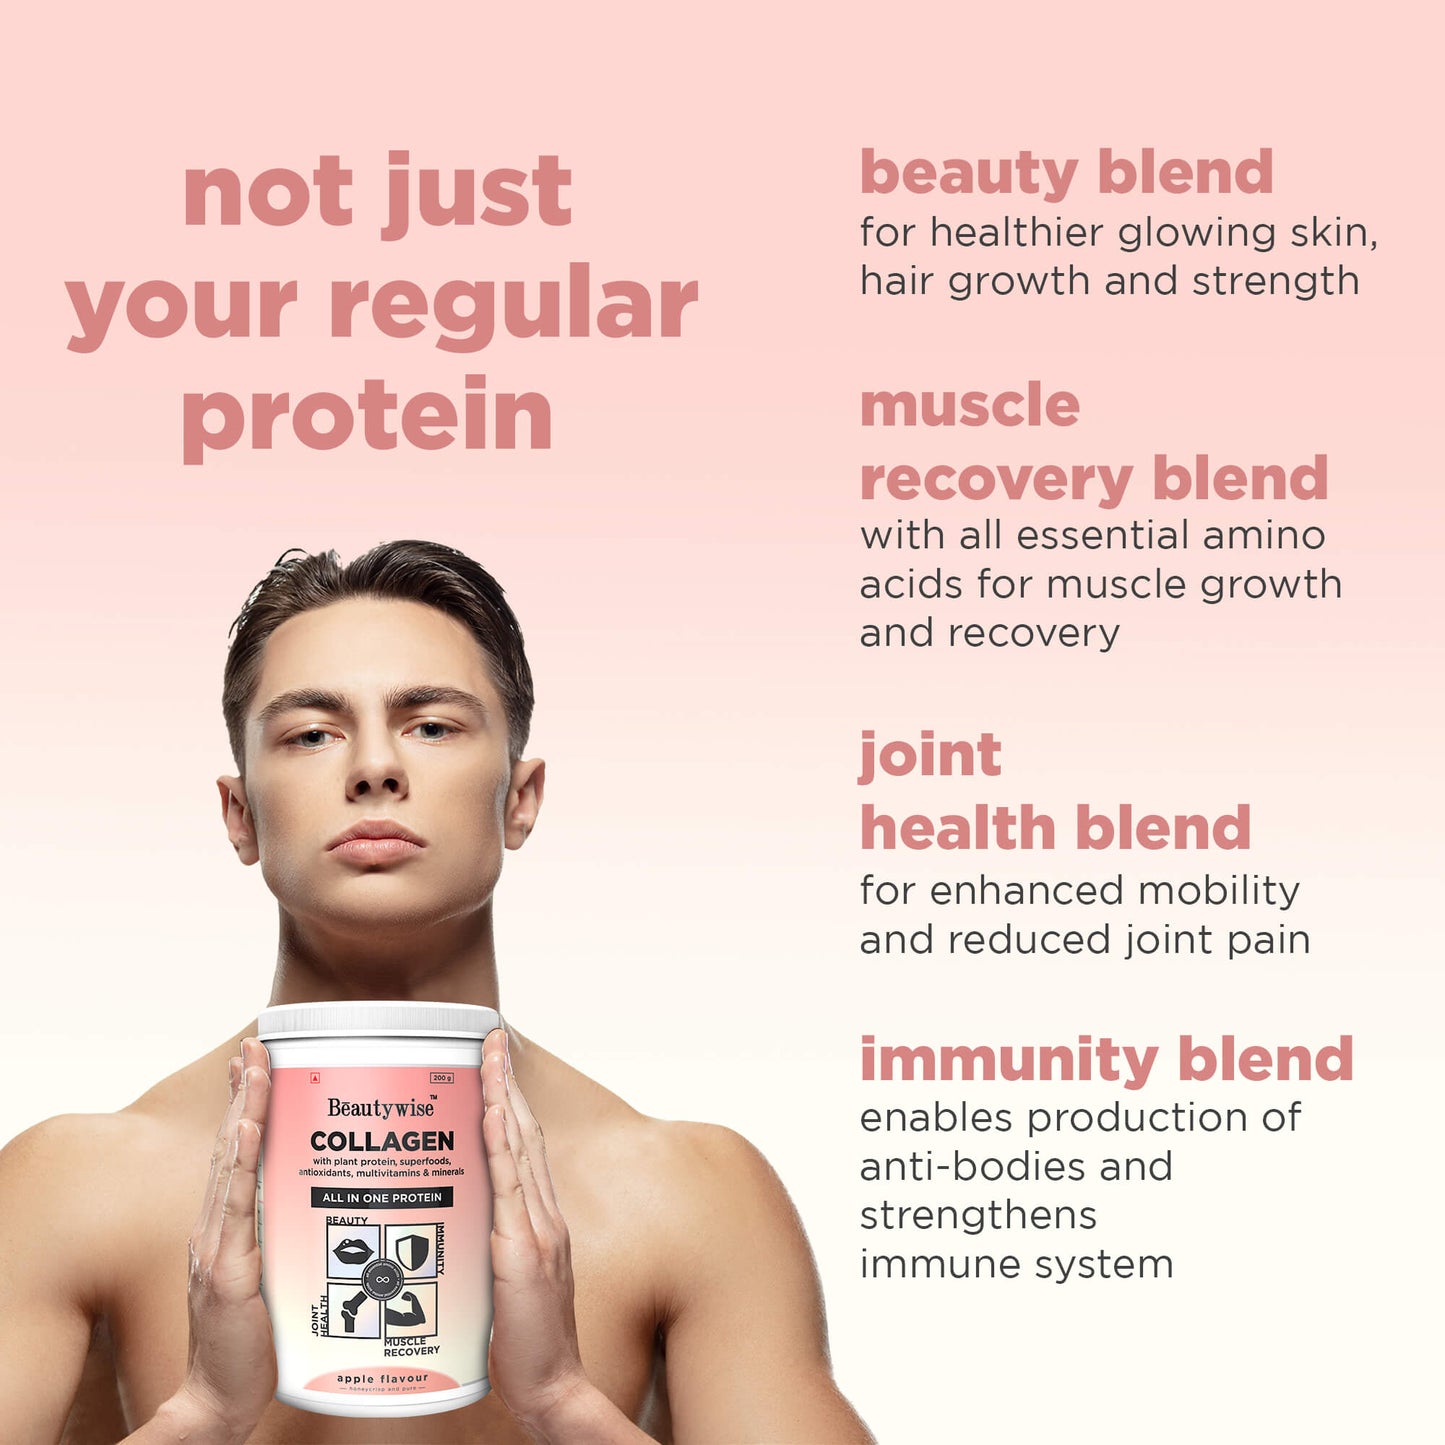 Apple All-in-one Collagen Proteins